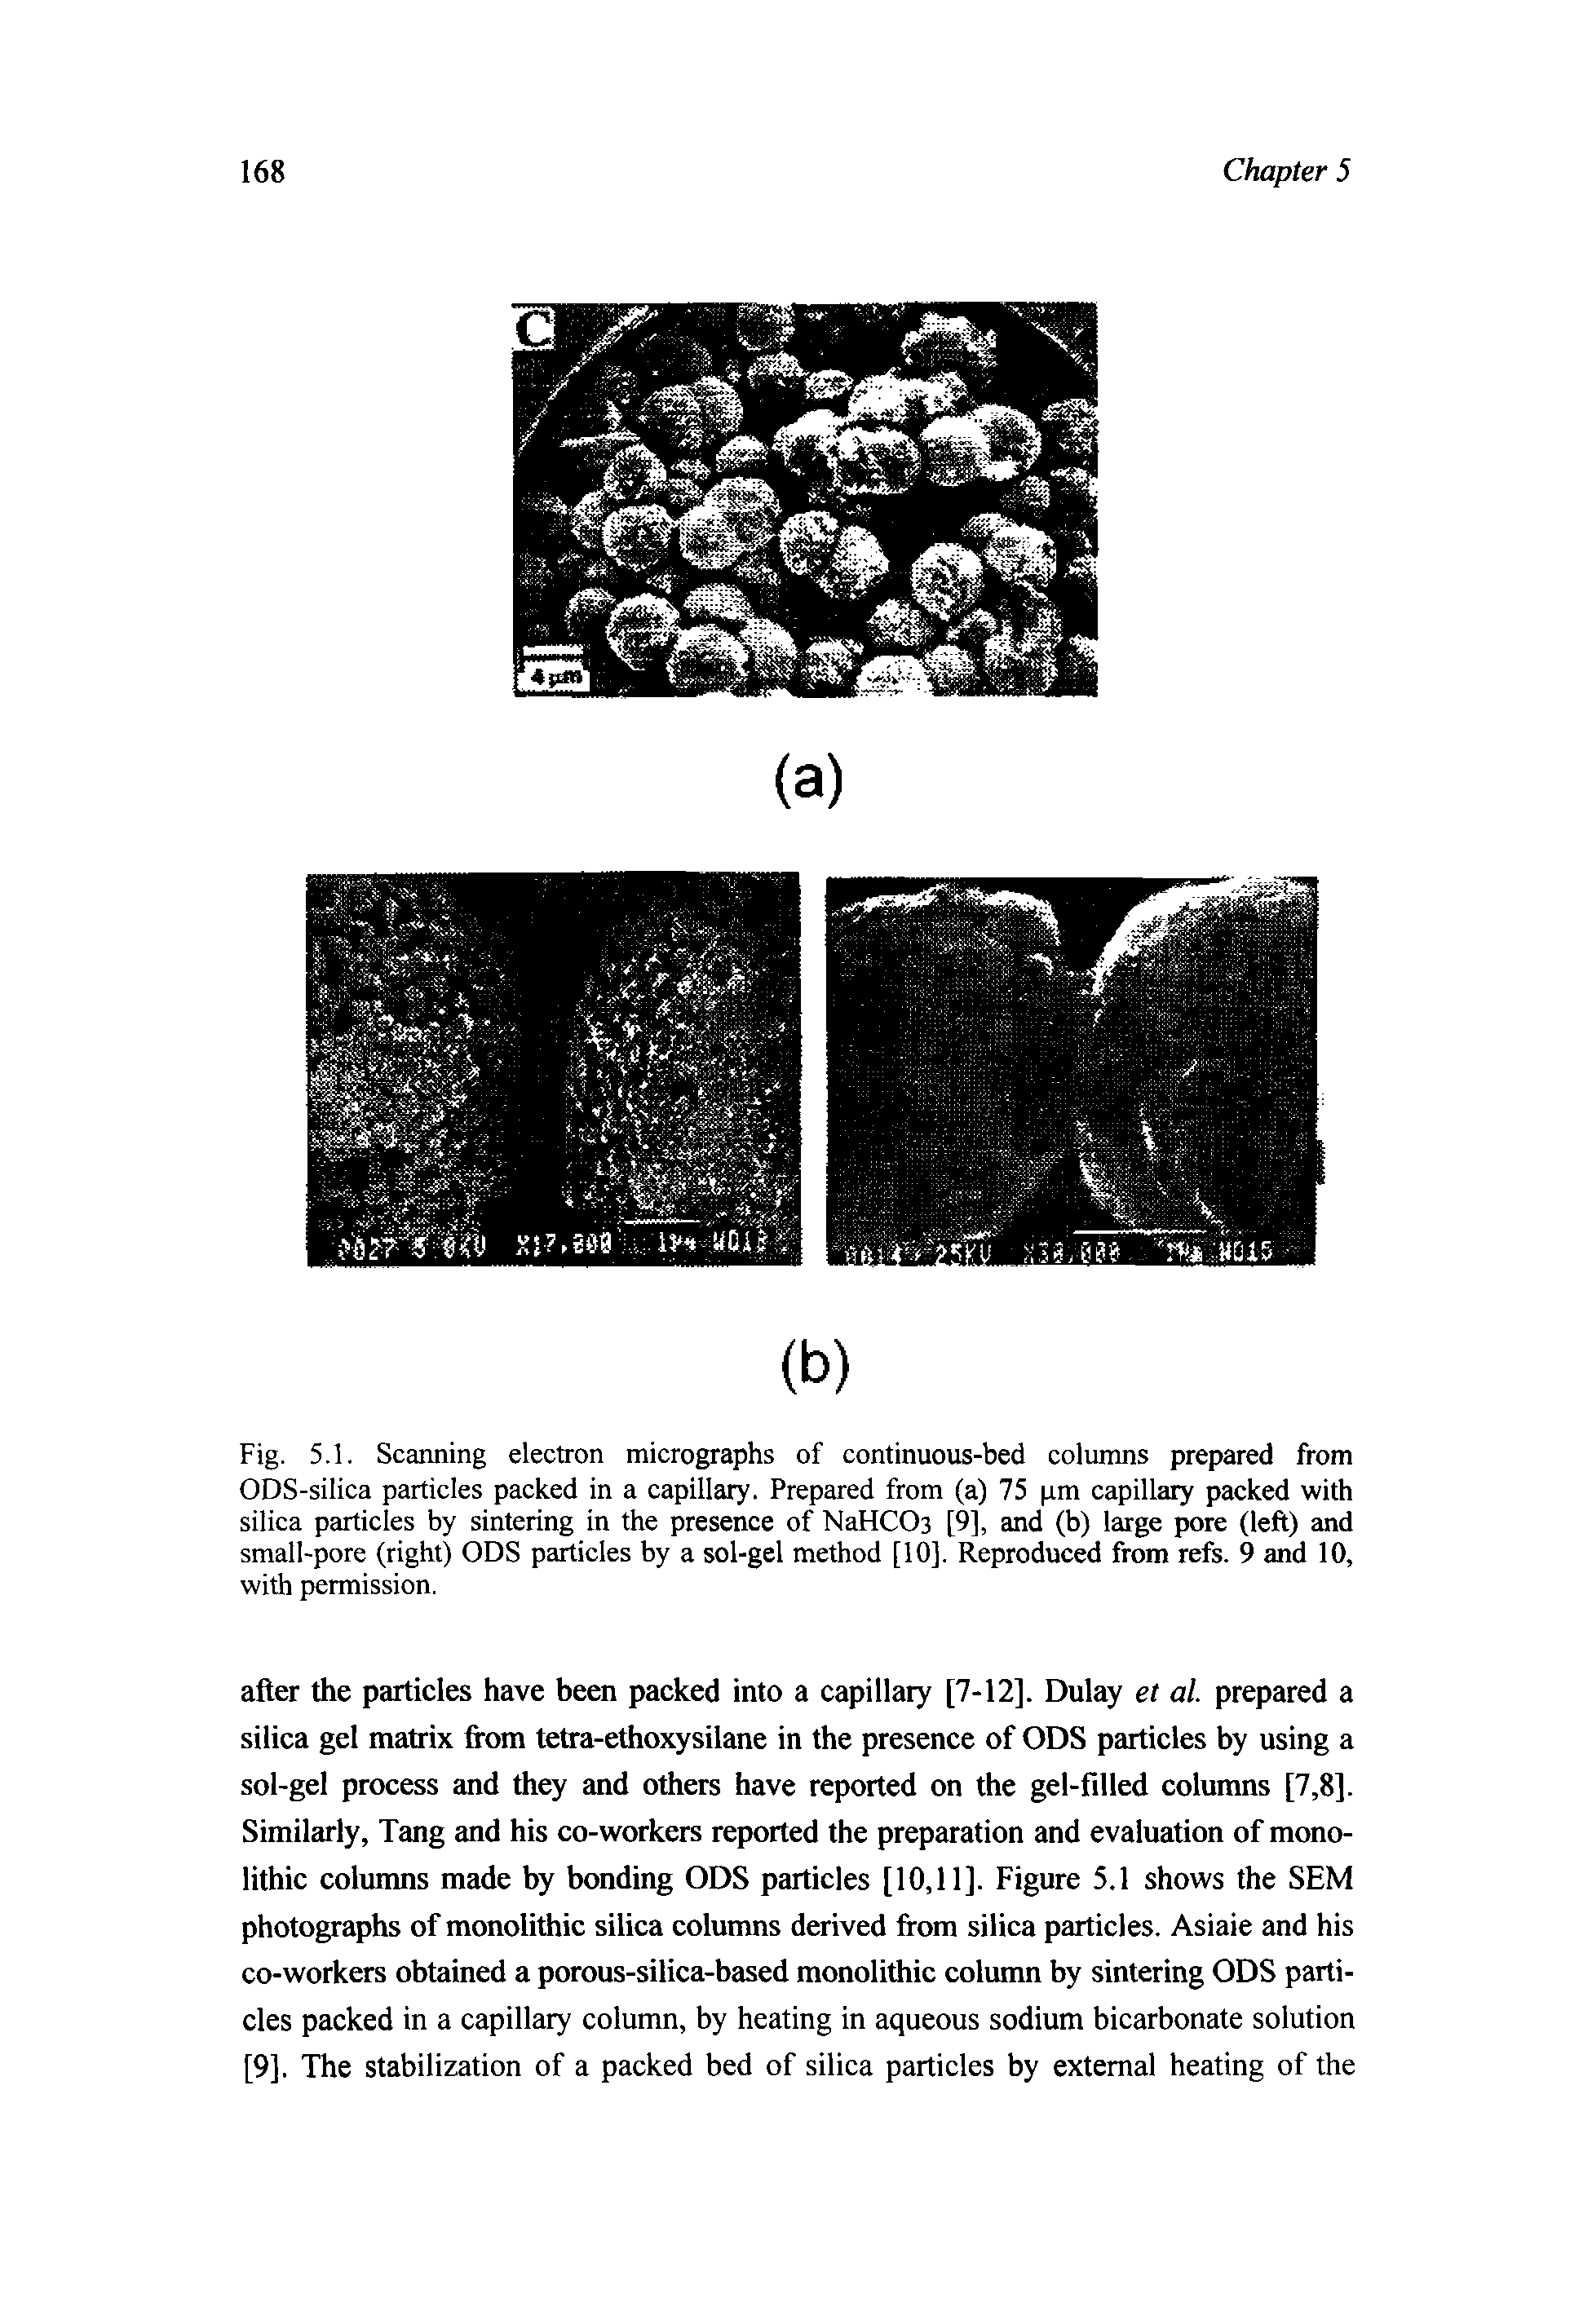 Fig. 5.1. Scanning electron micrographs of continuous-bed columns prepared from ODS-silica particles packed in a capillary. Prepared from (a) 75 pm capillary packed with silica particles by sintering in the presence of NaHC03 [9], and (b) large pore (left) and small-pore (right) ODS particles by a sol-gel method [10]. Reproduced from refs. 9 and 10, with permission.